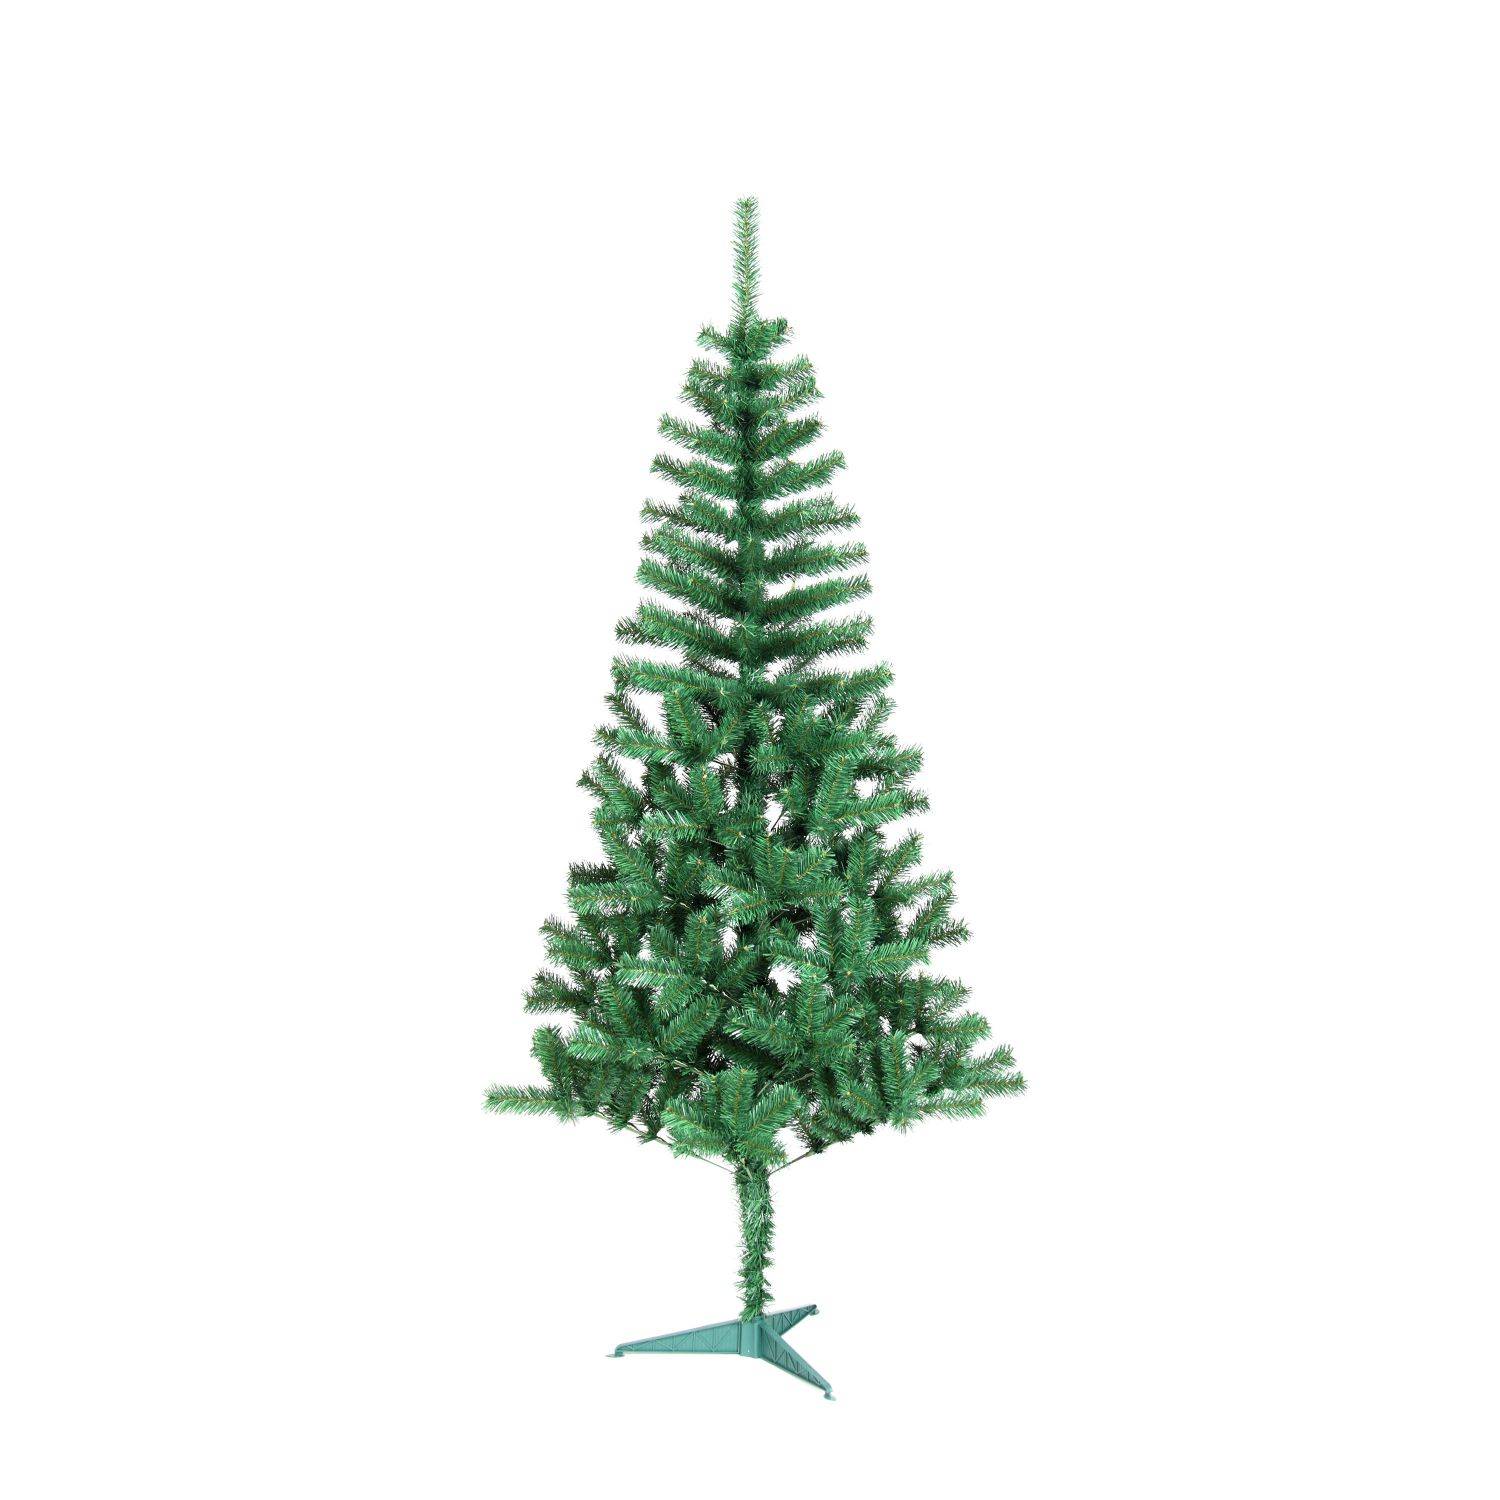 6ft artificial Christmas tree stand included Photo2